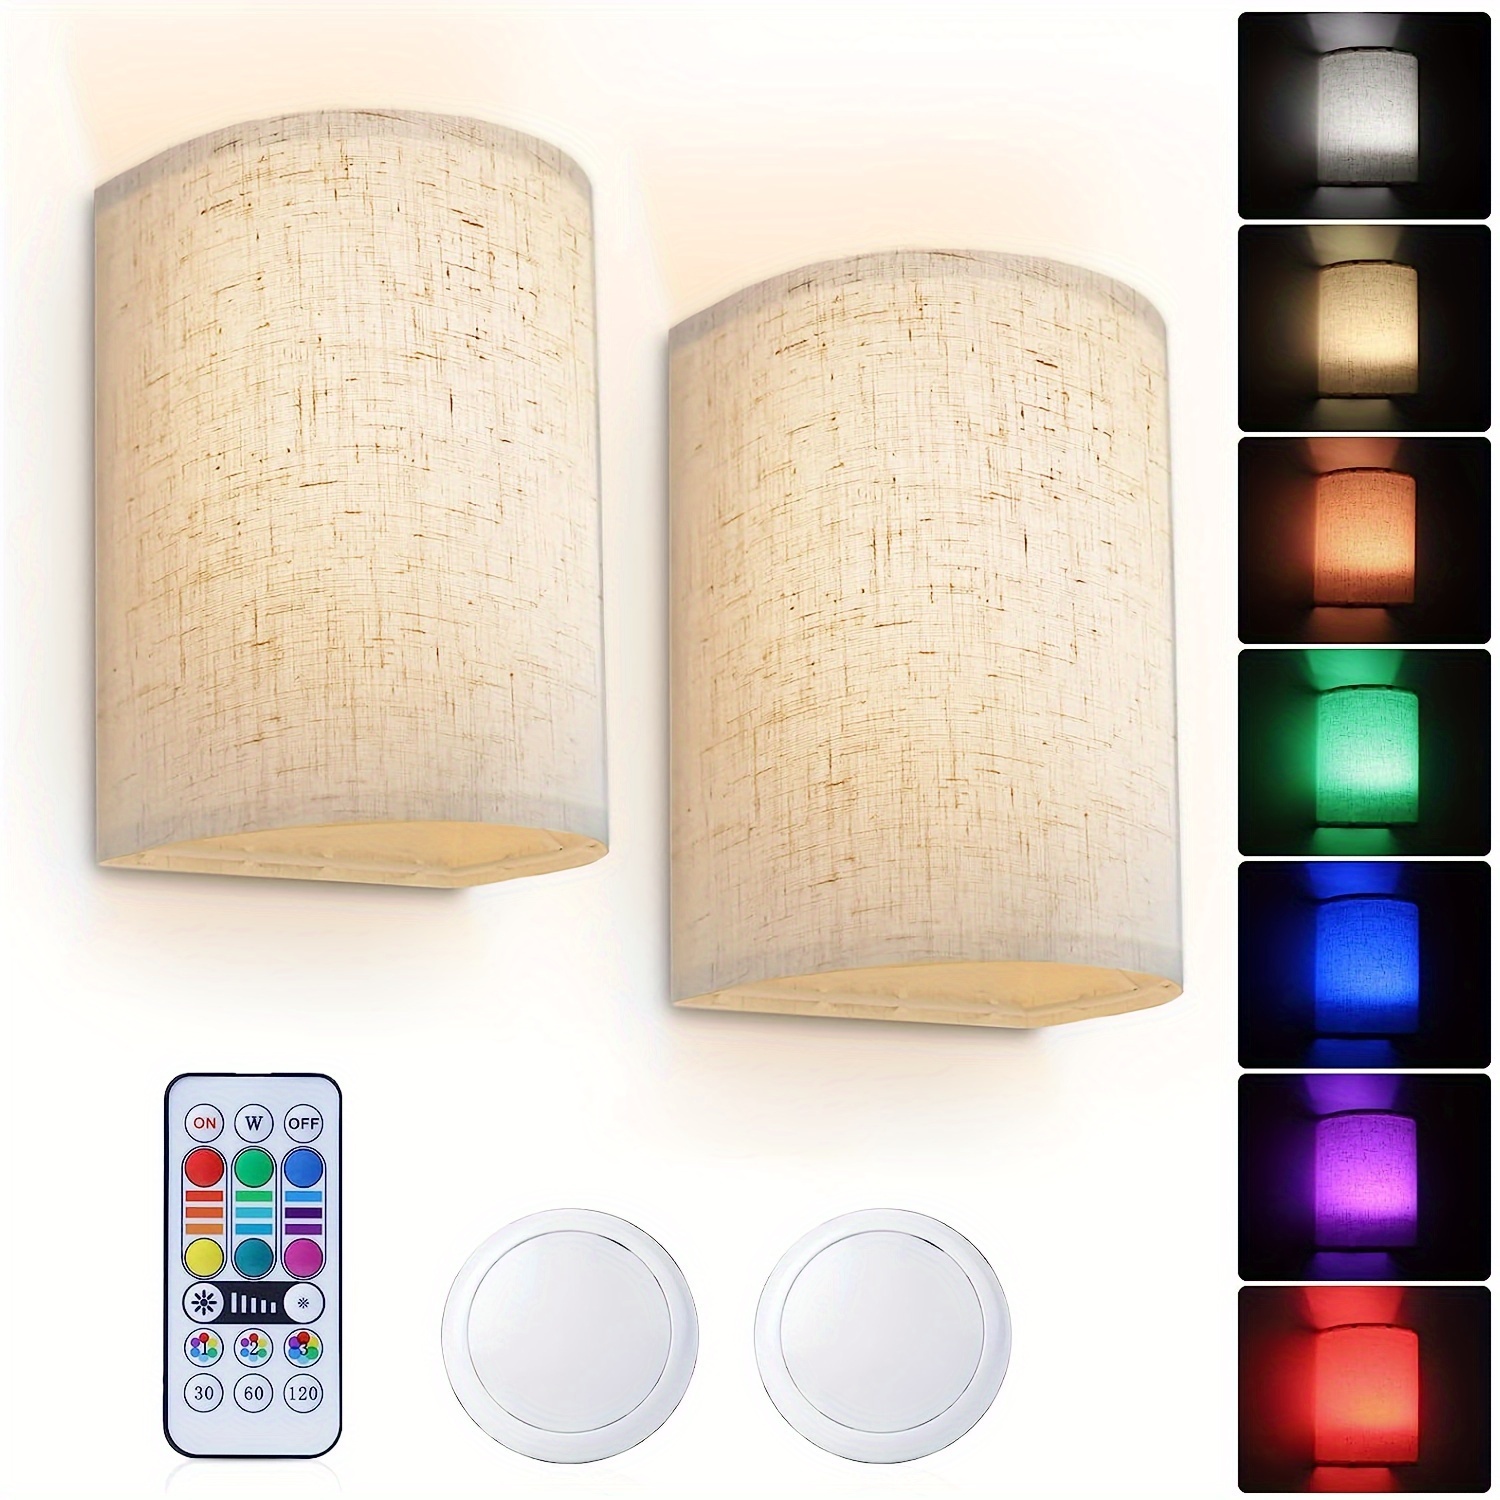 

2pcs Rgb Colors Wireless Wall Light Wall Sconce With Fabric Shade Remote Control Dimmable Lighting Lamp Fixtures For Bedroom Living Room Hallway